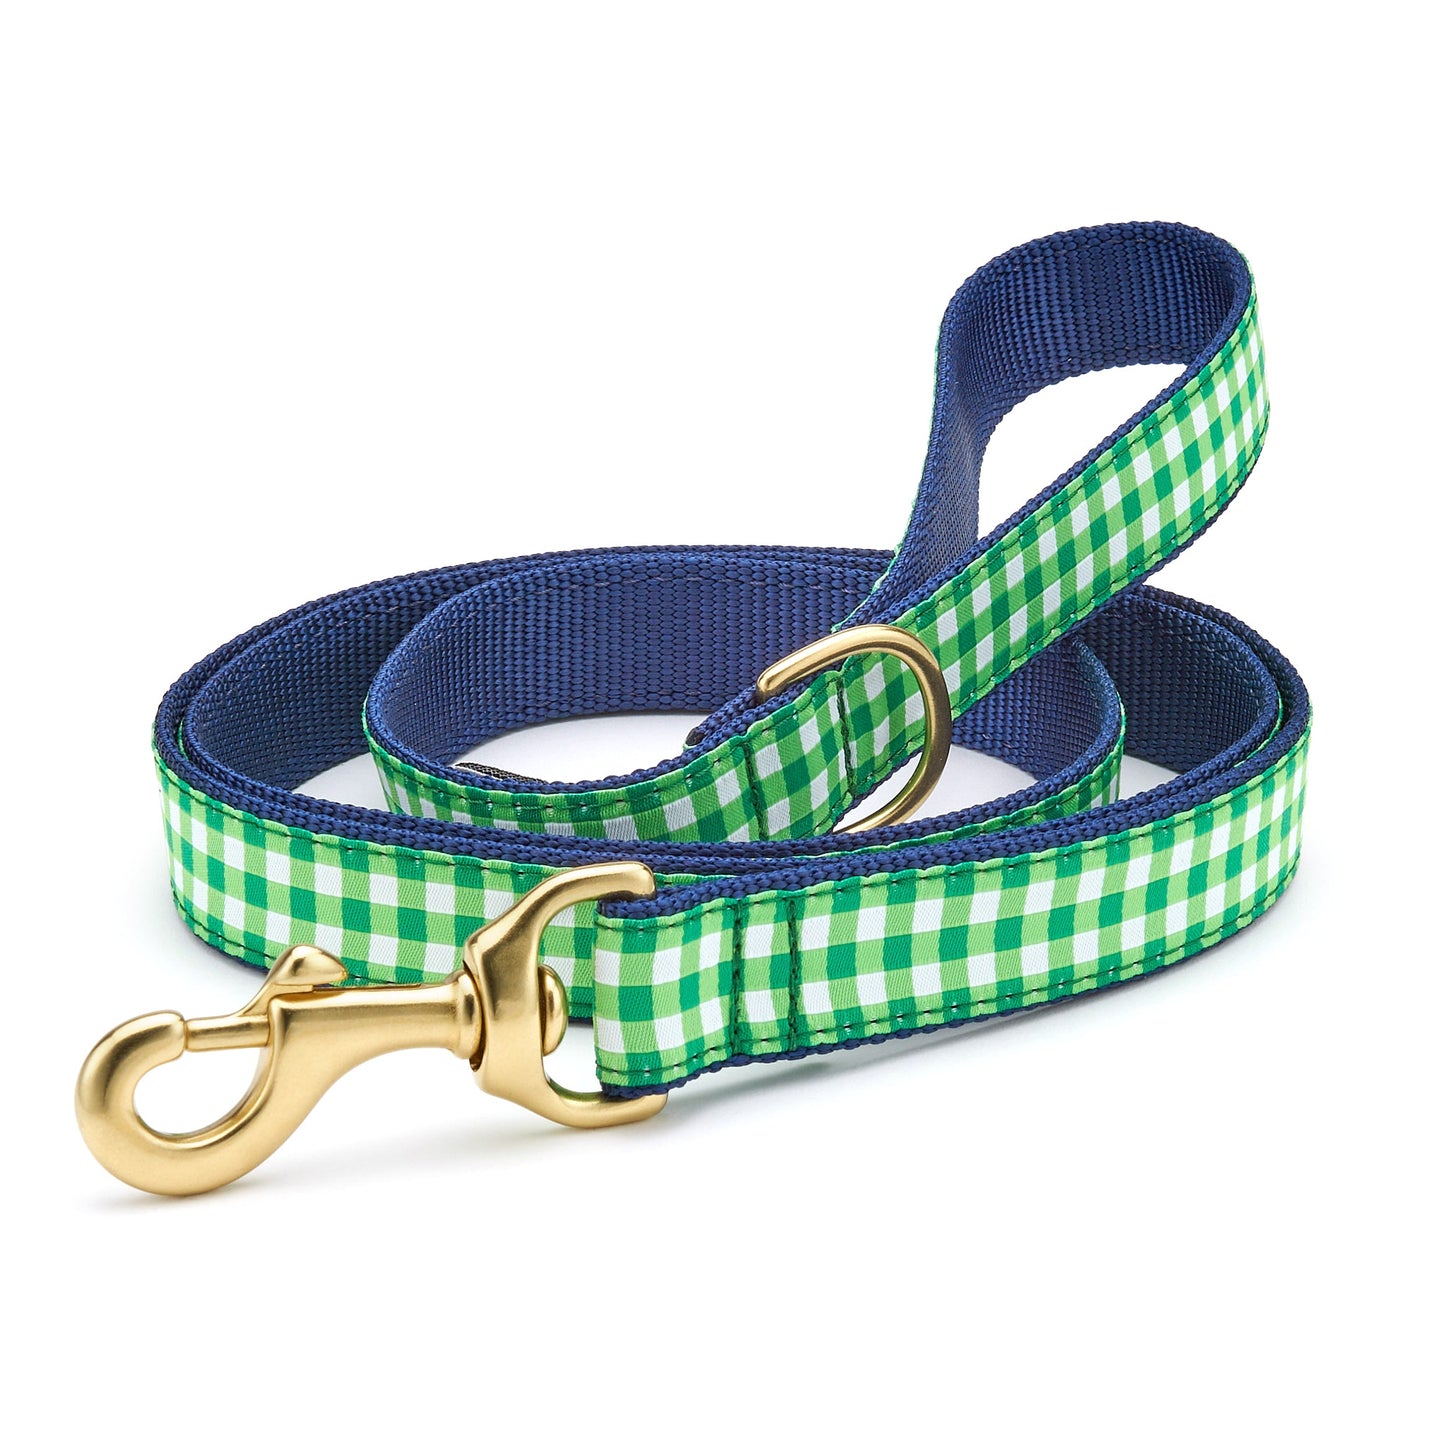 Lime Gingham Dog Lead by Up Country